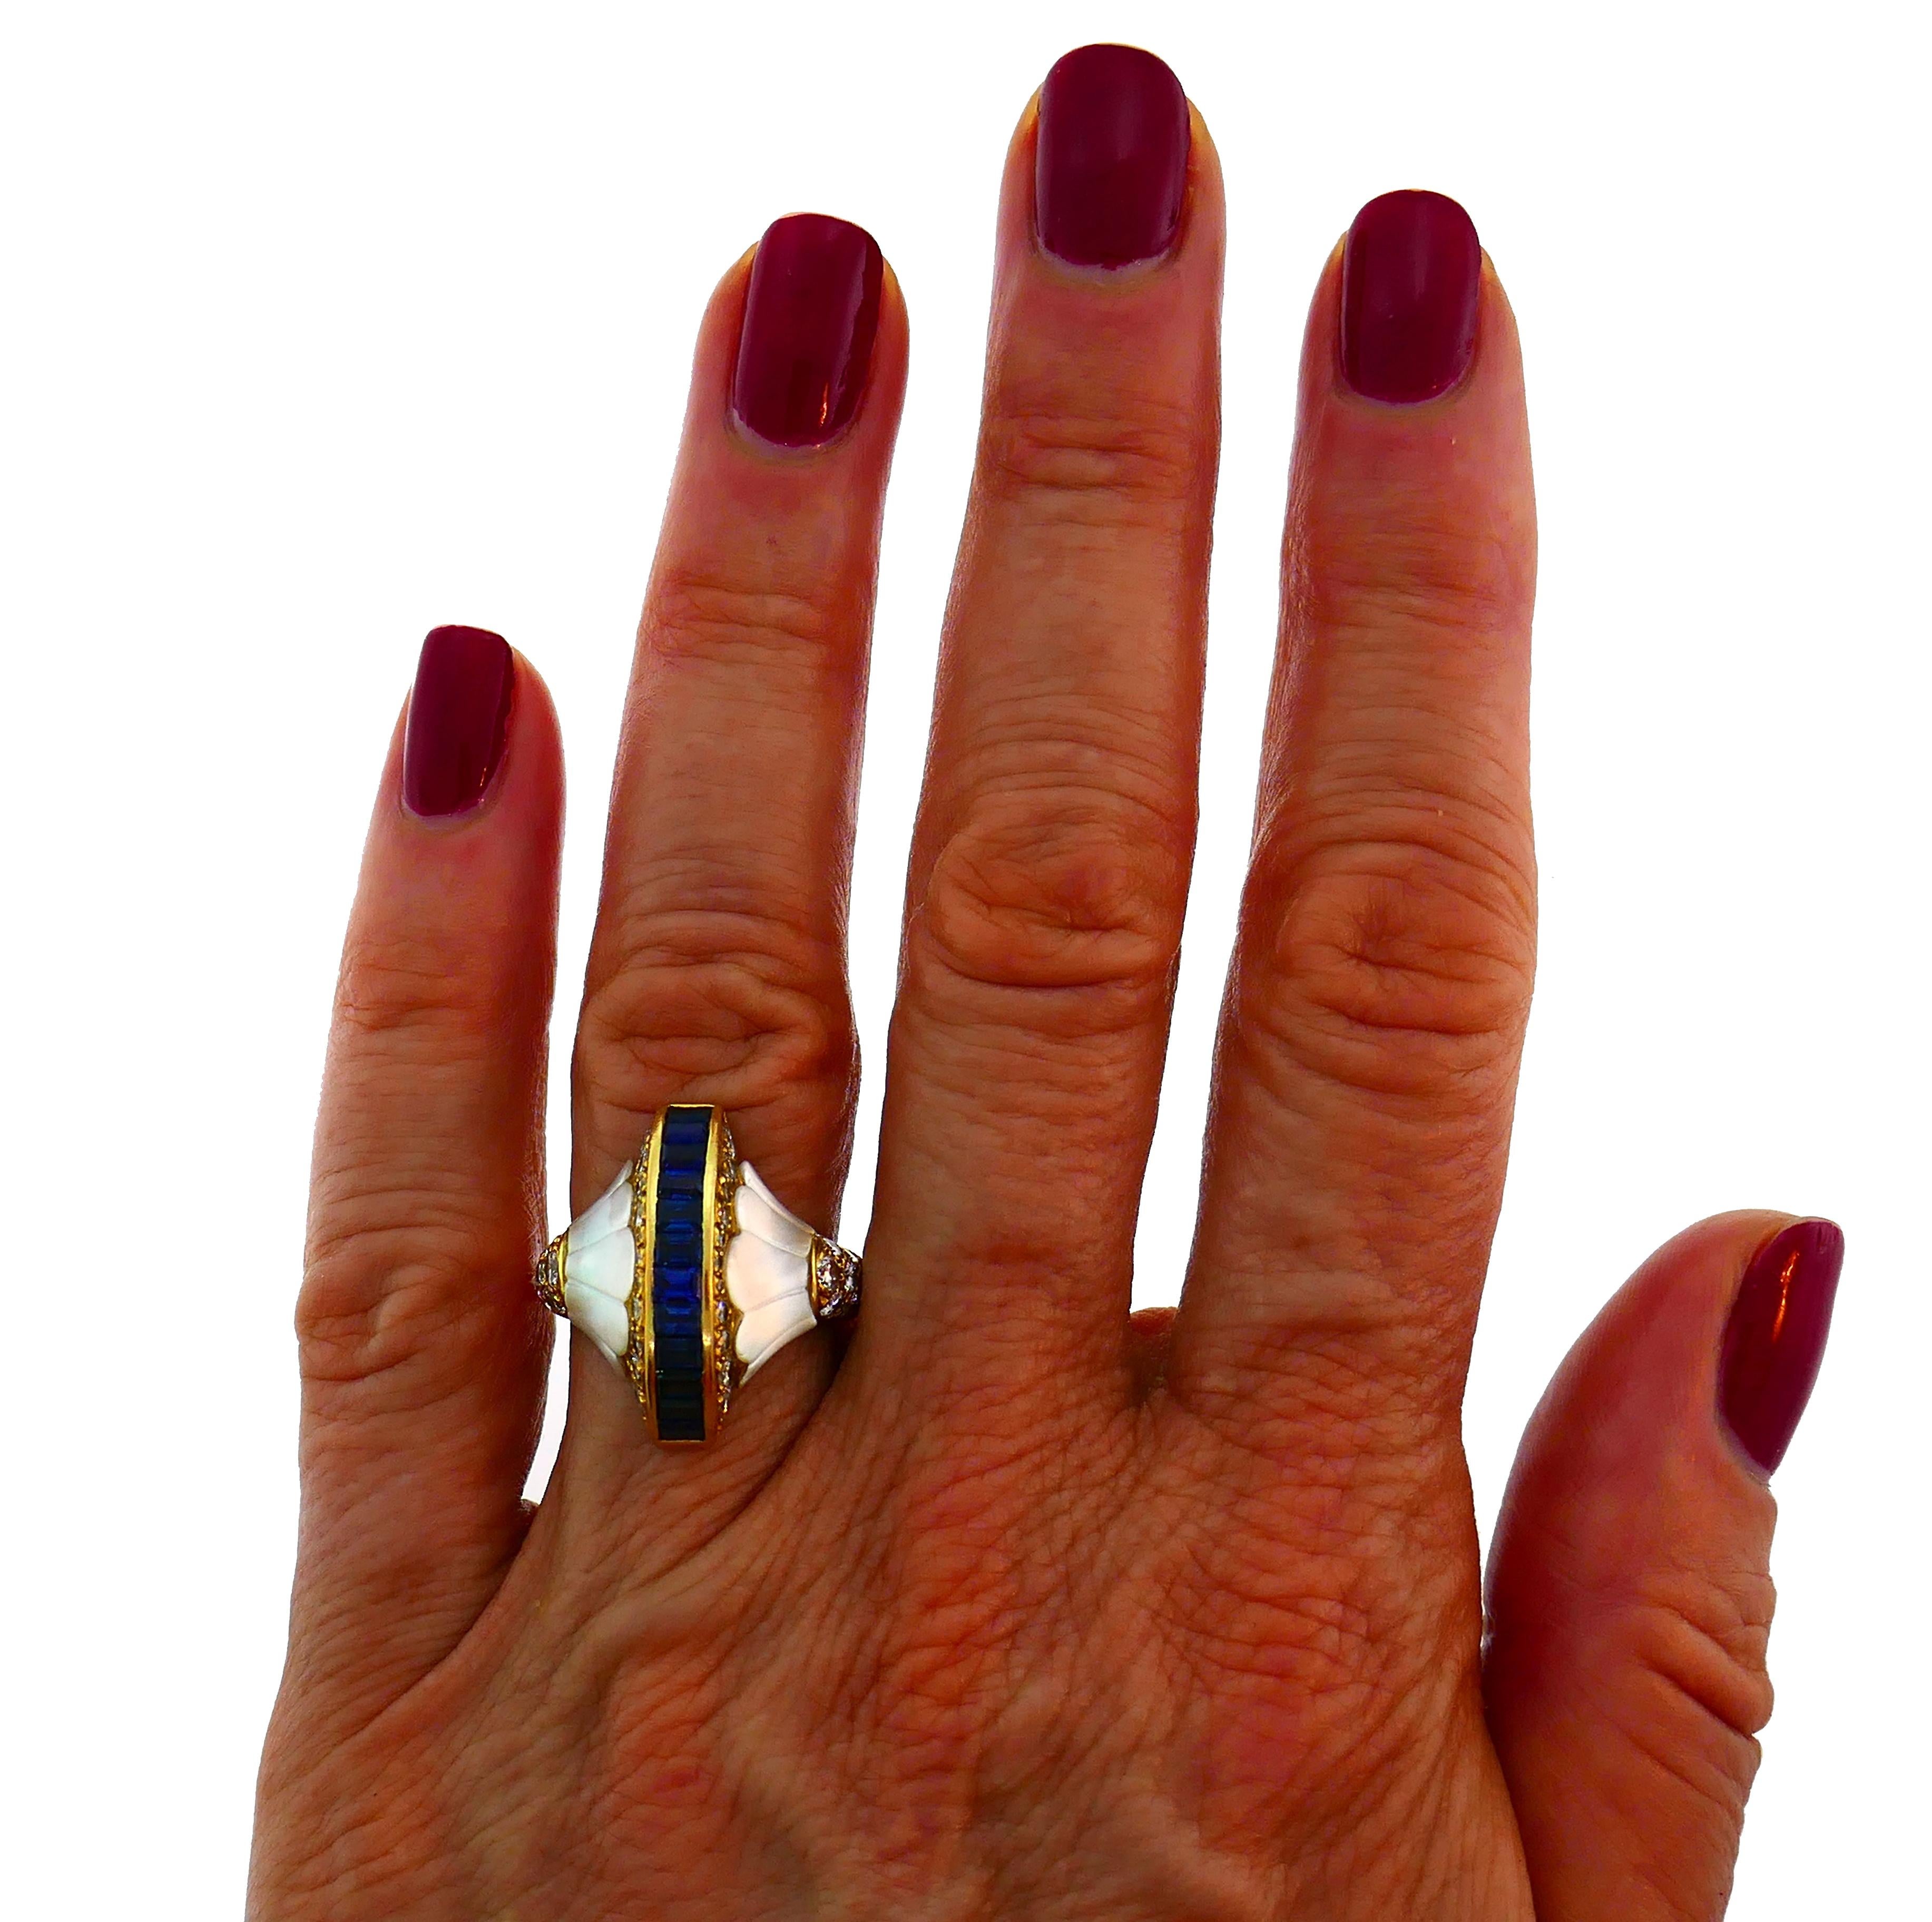 Exquisite cocktail ring made of 18 karat yellow gold, carved mother-of-pearl and accented with eleven emerald cut sapphire (total weight approximately 1.10 carats) and round transitional cut diamonds (F-G color, VS clarity, total weight